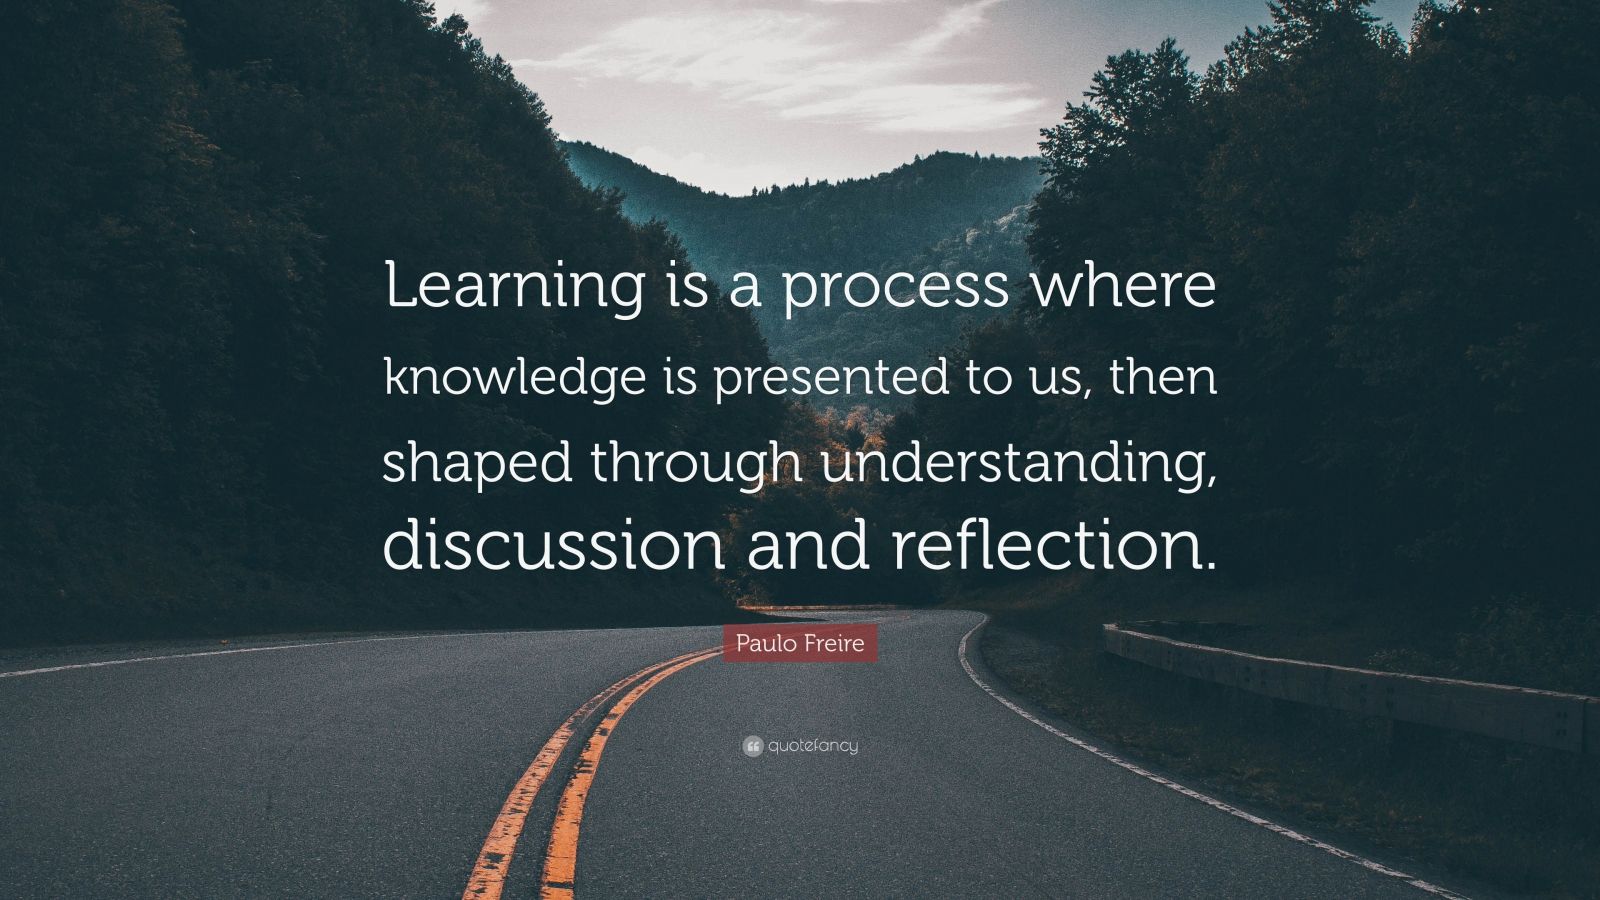 Paulo Freire Quote “Learning is a process where knowledge